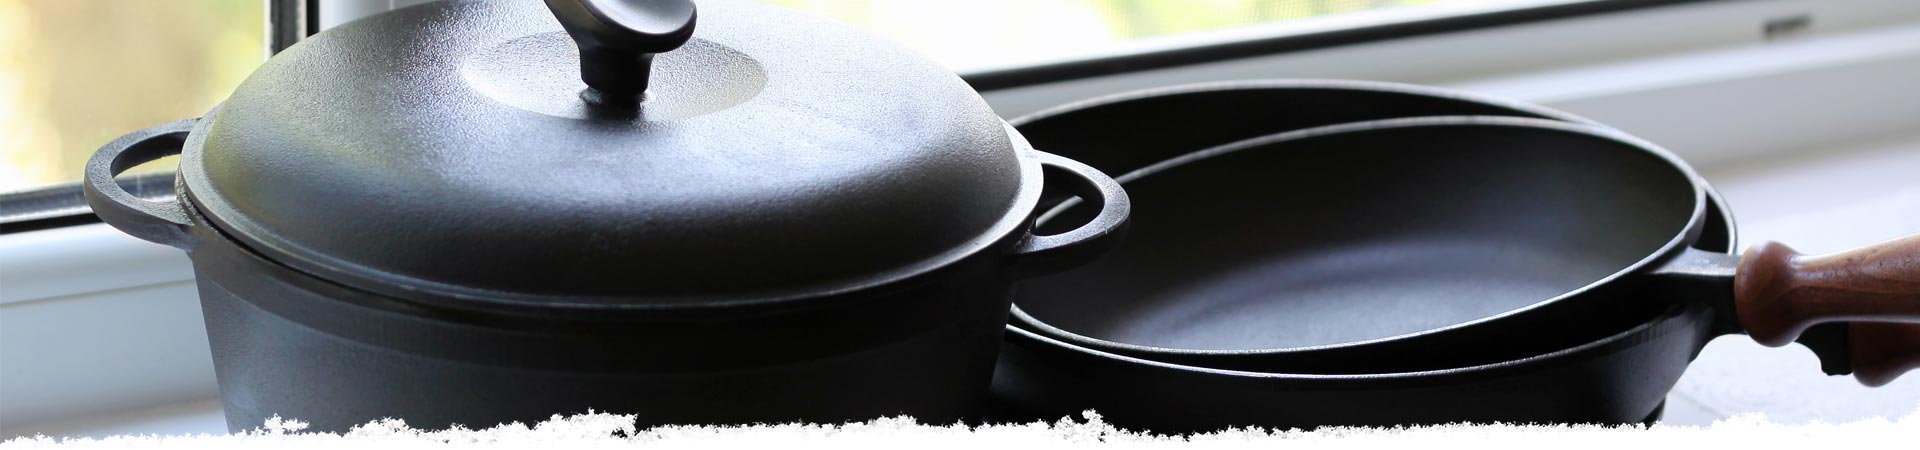 Getting Real with Cast Iron Pans